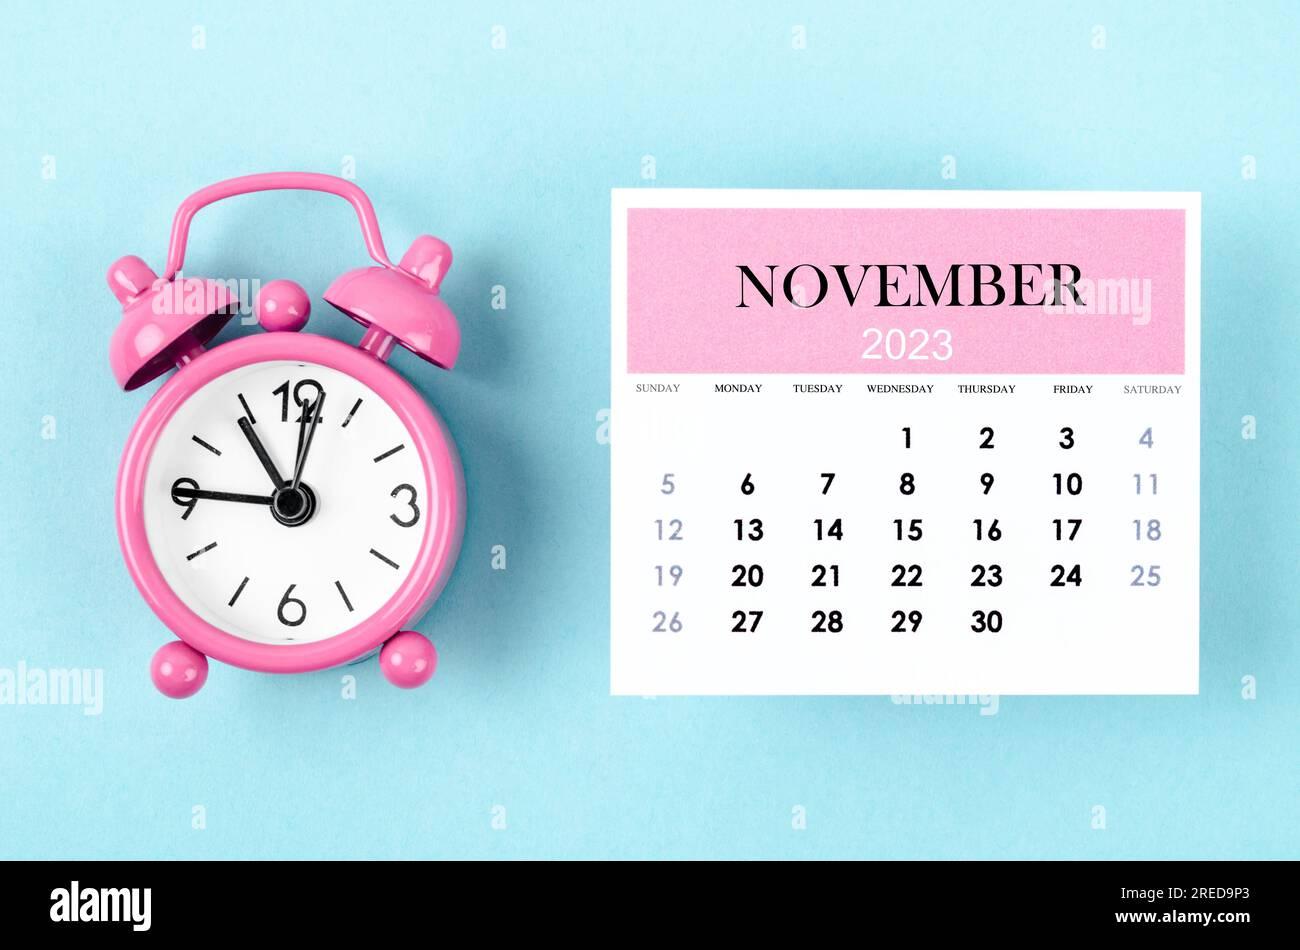 November Monthly Calendar For Year With Pink Color Alarm